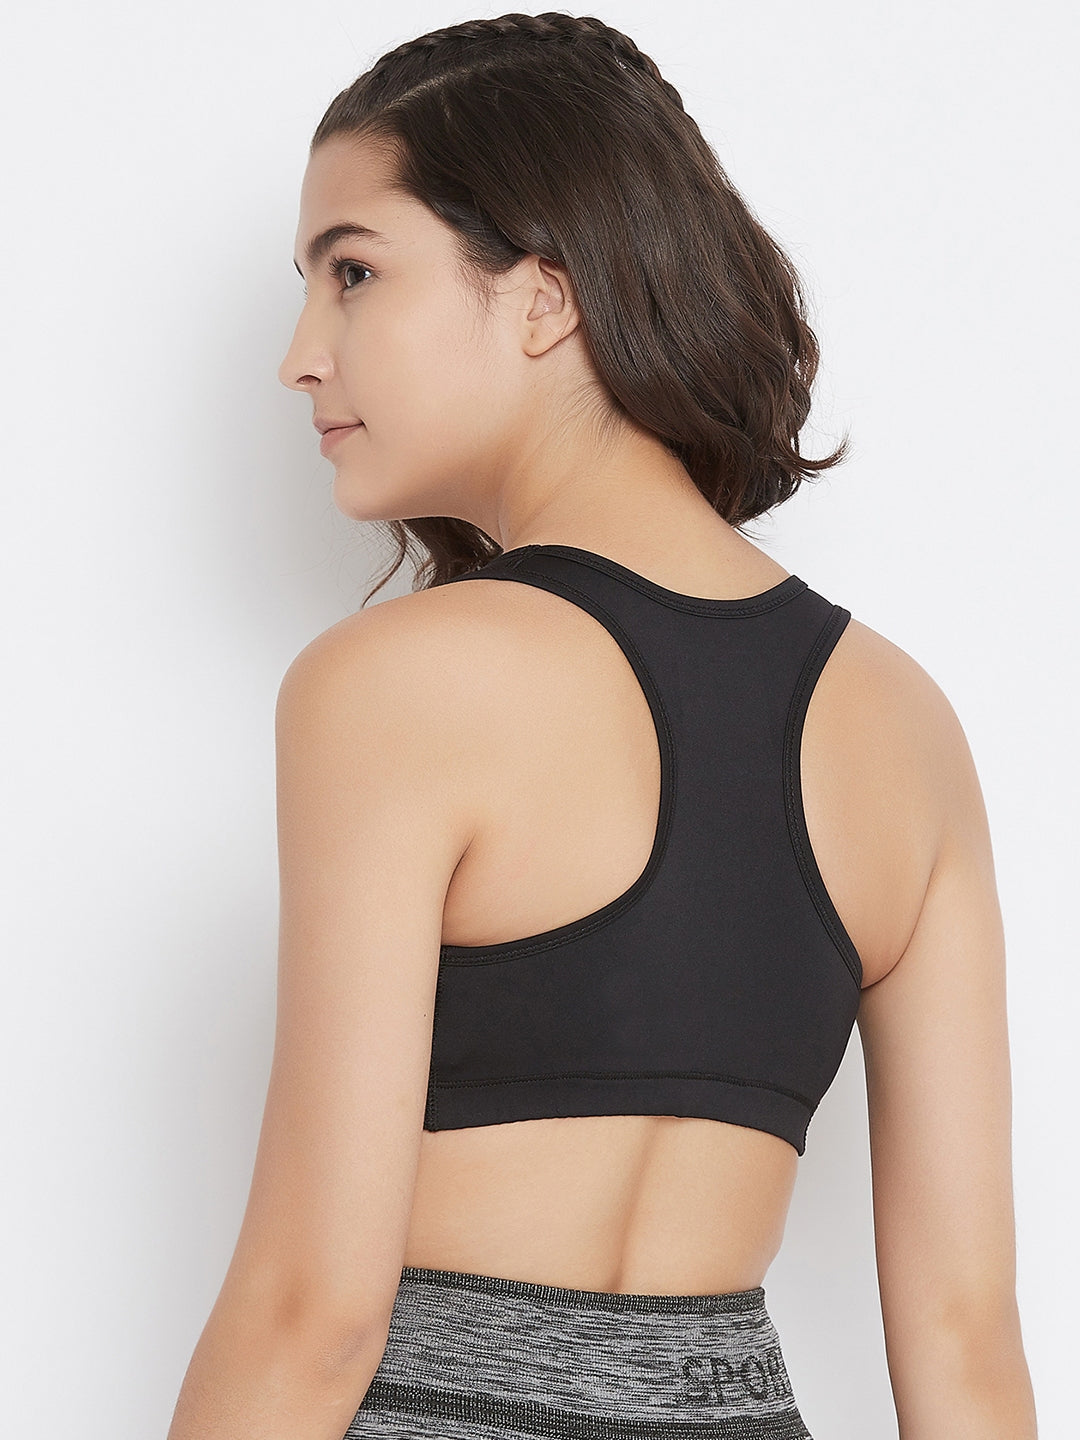 Buy online Black Polyester Sports Bra from lingerie for Women by Jump Usa  for ₹489 at 59% off